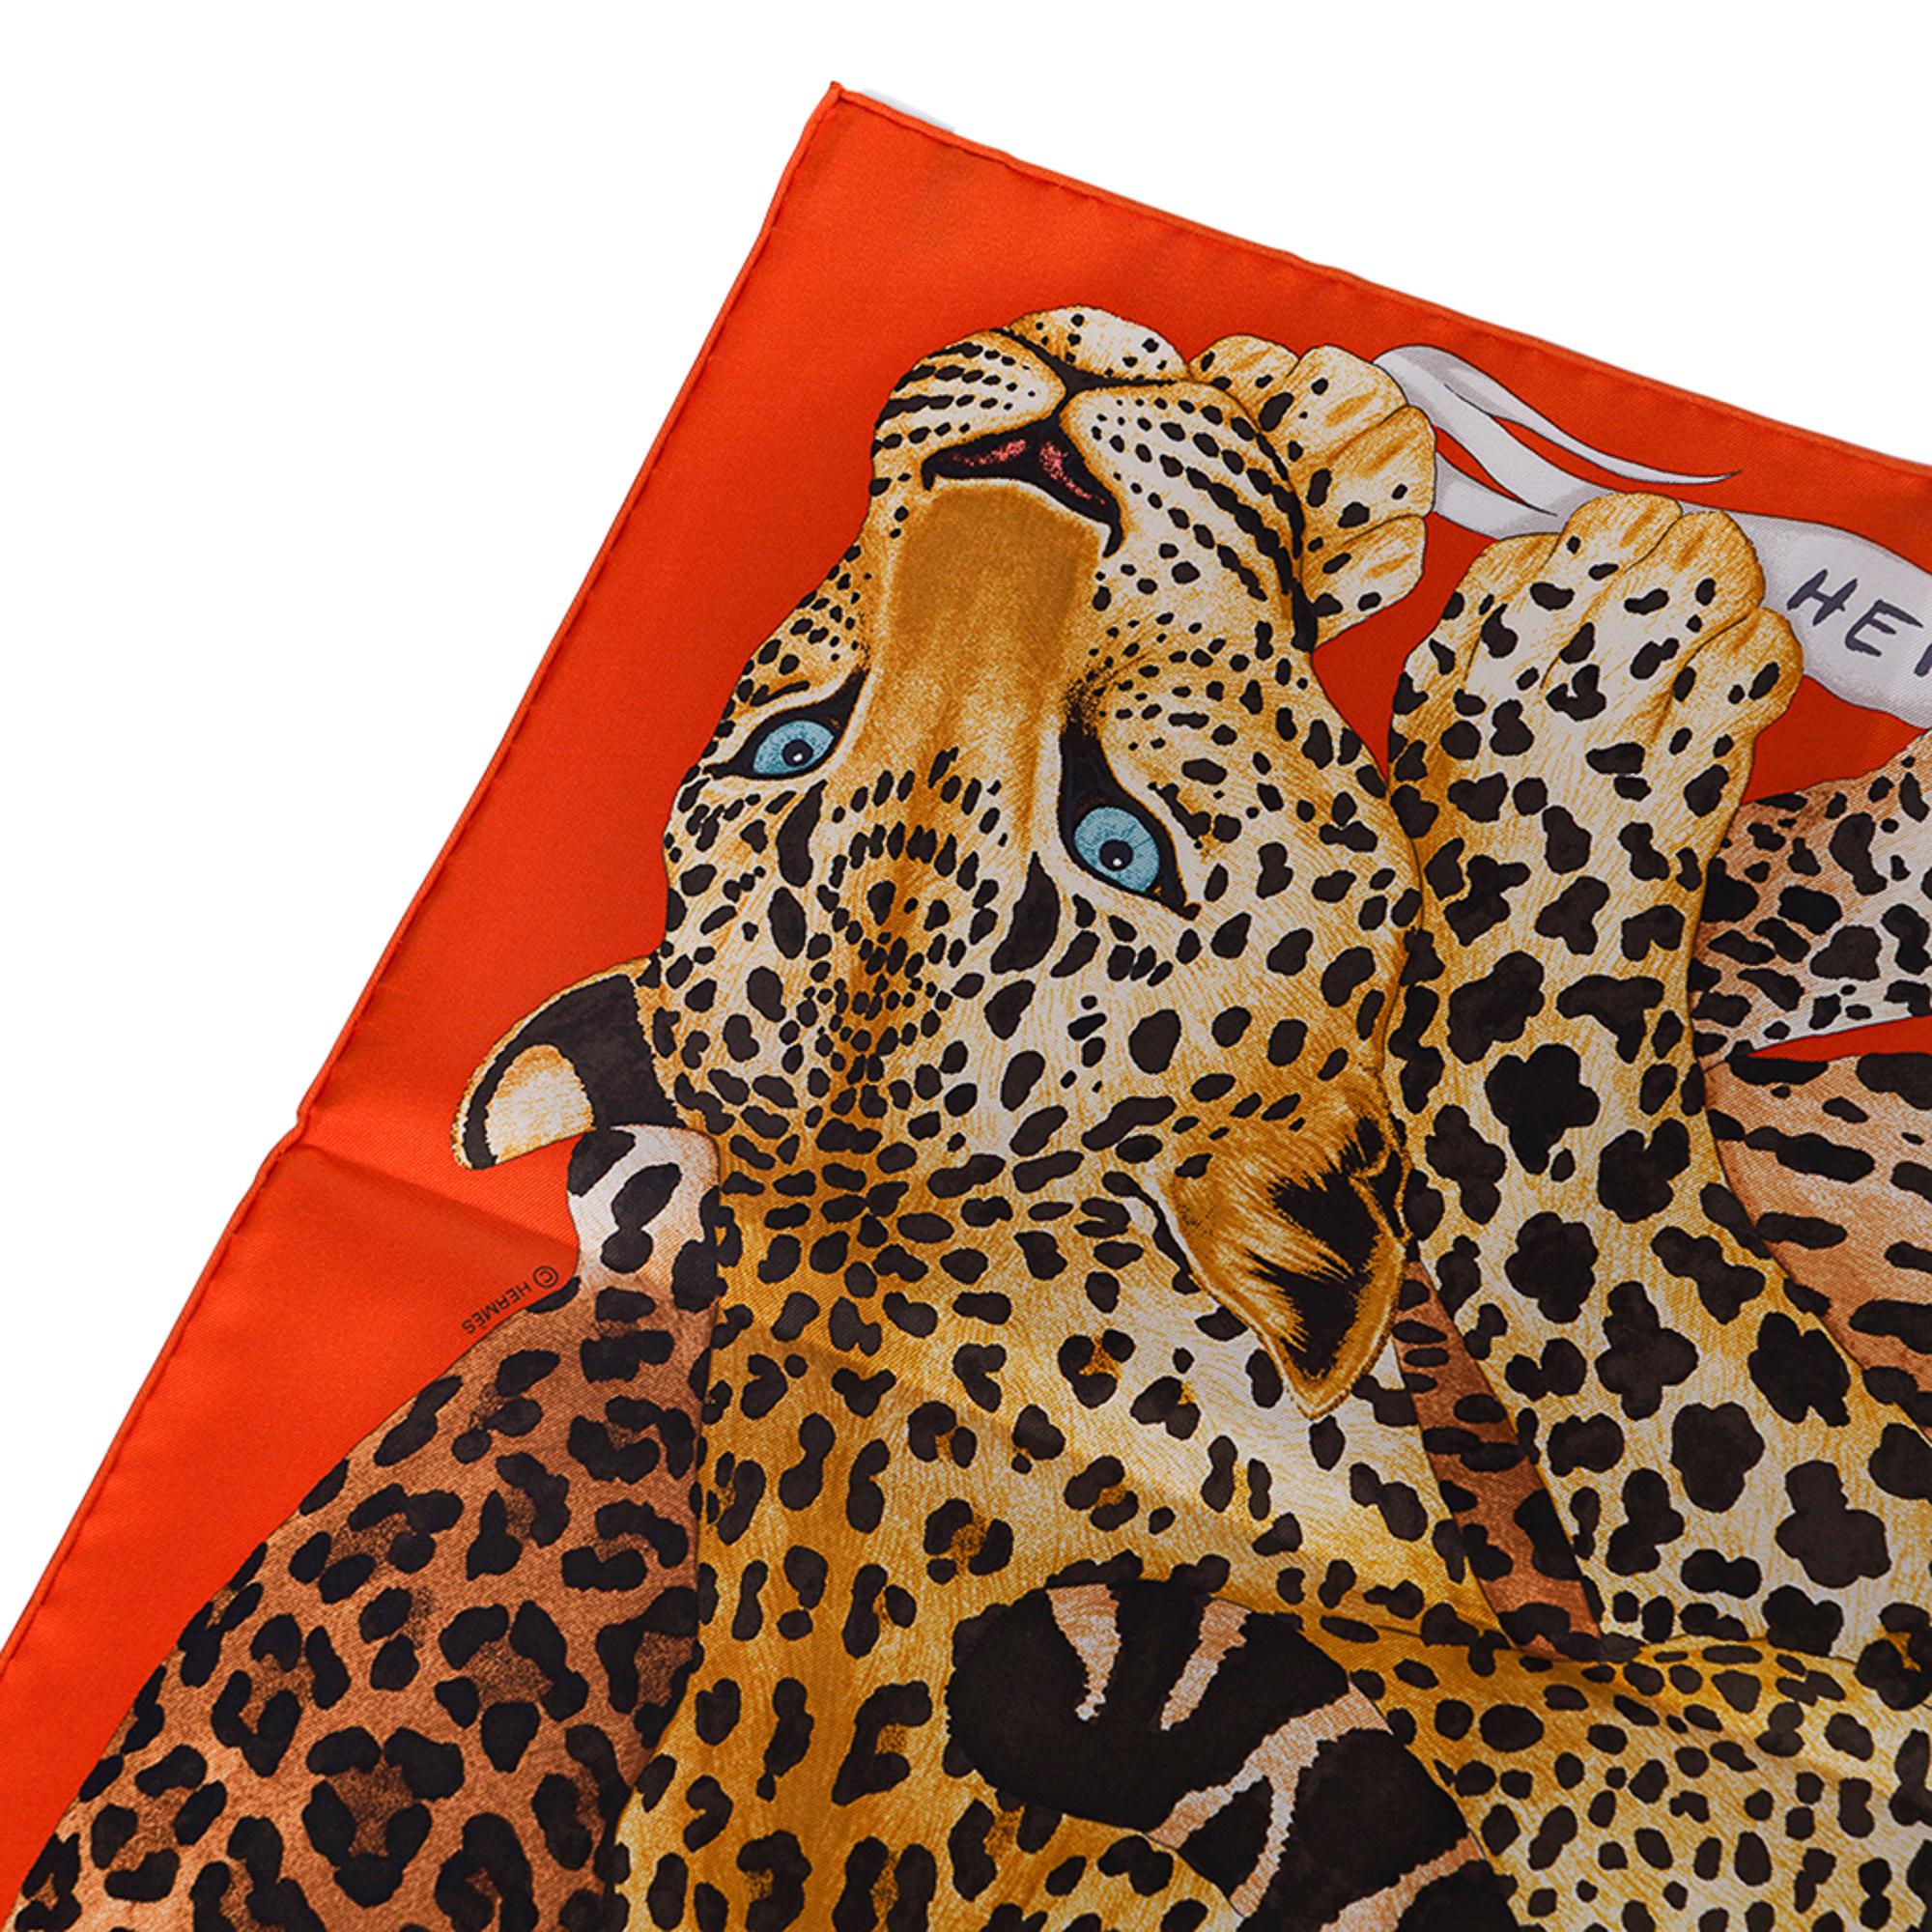 Mightychic offers an Hermes Lazy Leopardesses silk scarf featured in Potiron, Brun and Miel.
This exquisite Hermes scarf depicts the graceful majesty of felines in rest.
Designed by Arlette Ess.
Signature hand rolled edge.
Comes with signature